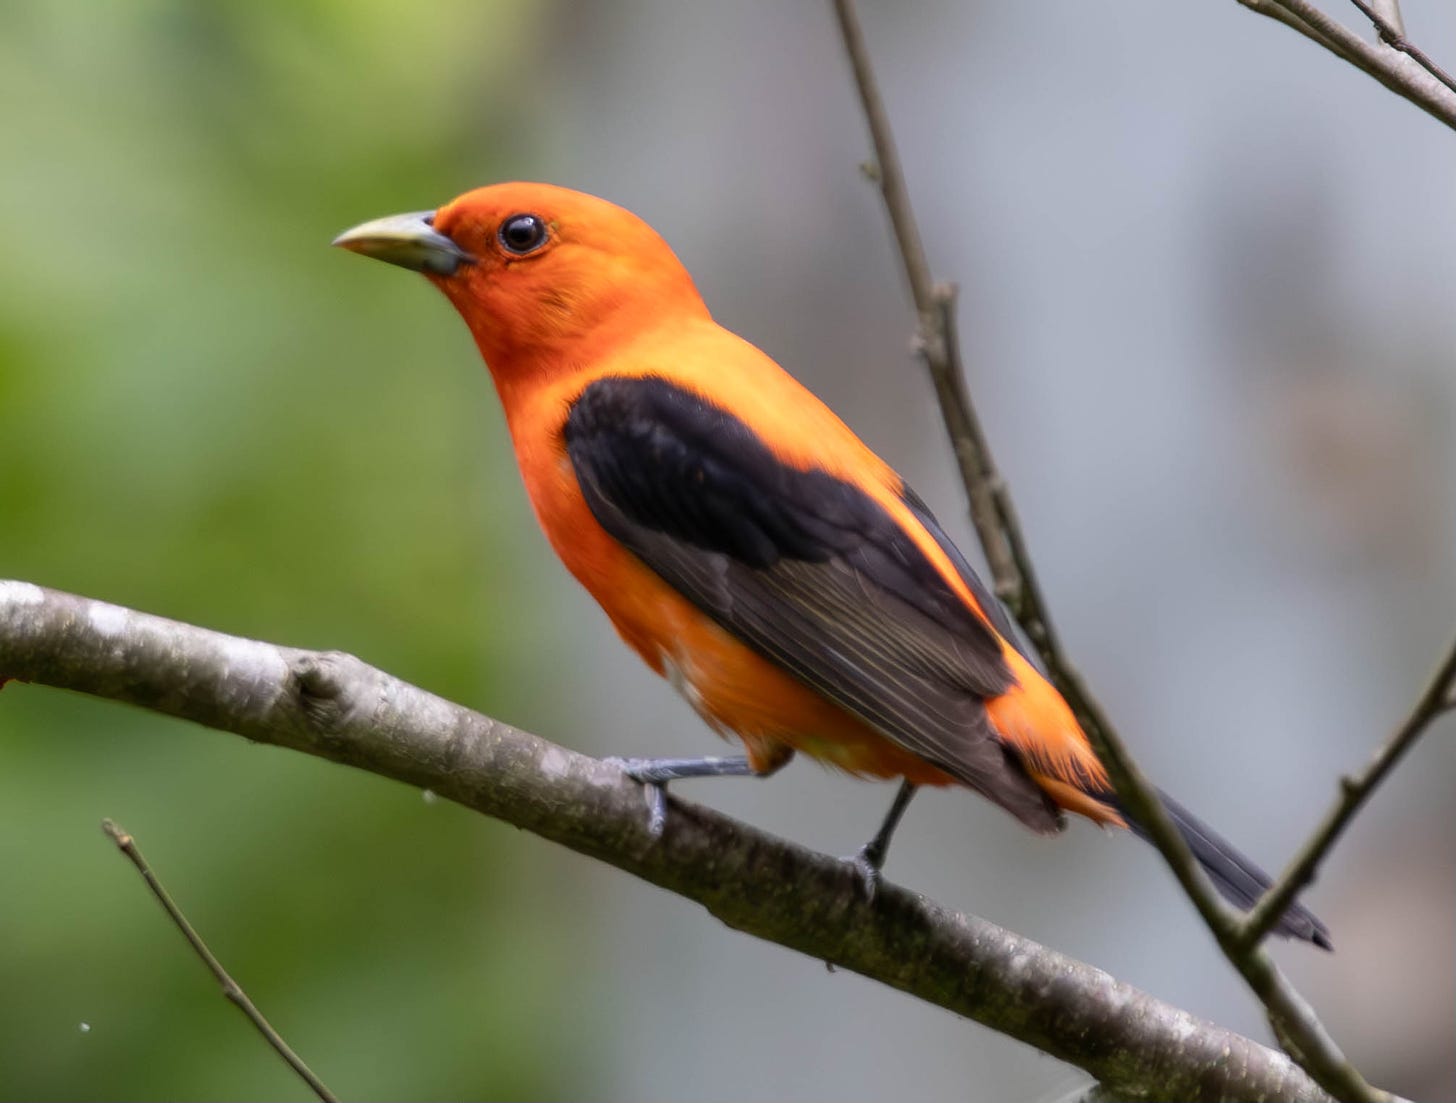 an orangish red bird with black wings (scarlet tanager) perches on a branch